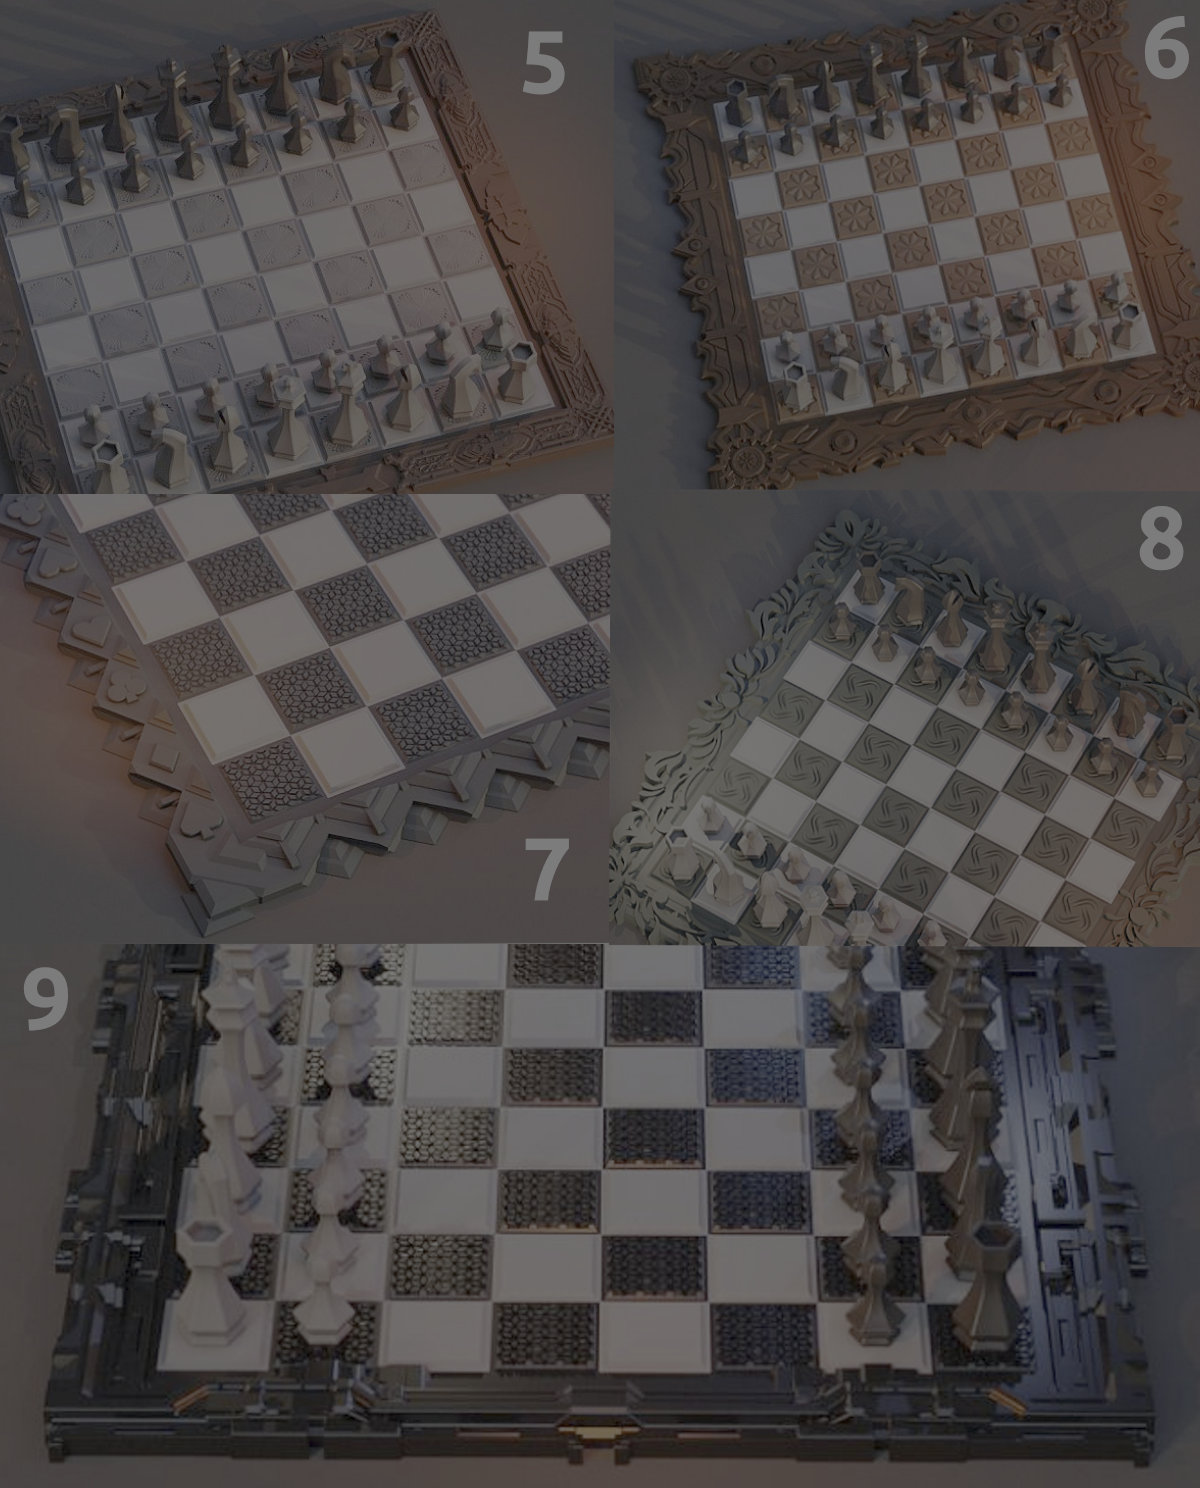 Hexchess 2 Custom Chess Board and Pieces